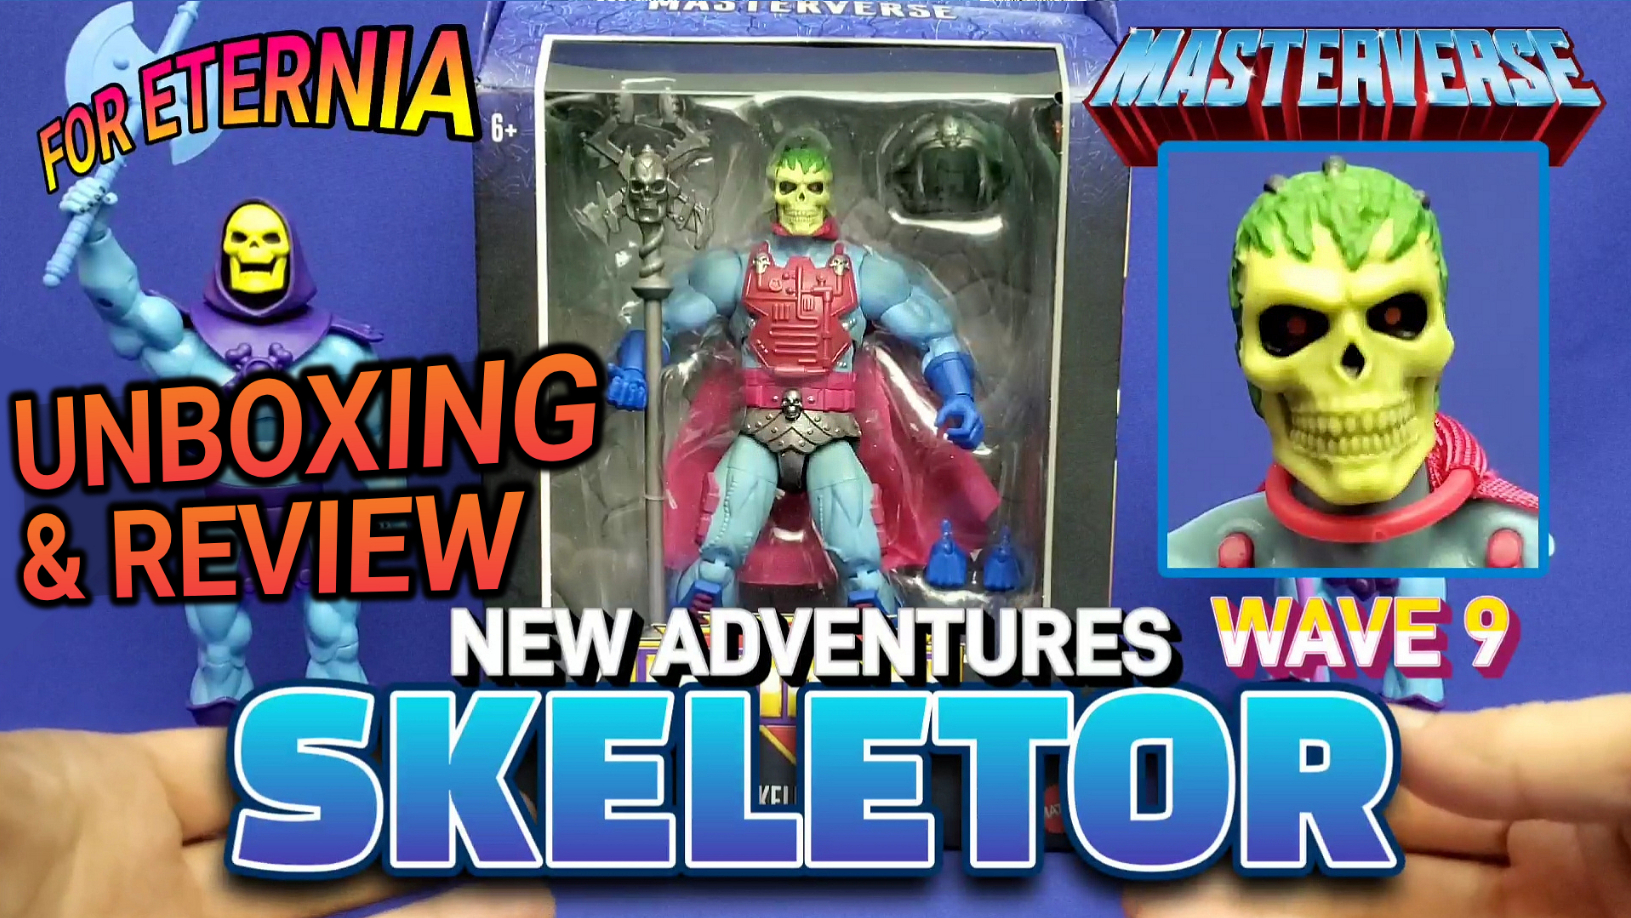 UNBOXING & REVIEW Masterverse SKELETOR Wave 9 Masters of the Universe New Adventures Action Figure